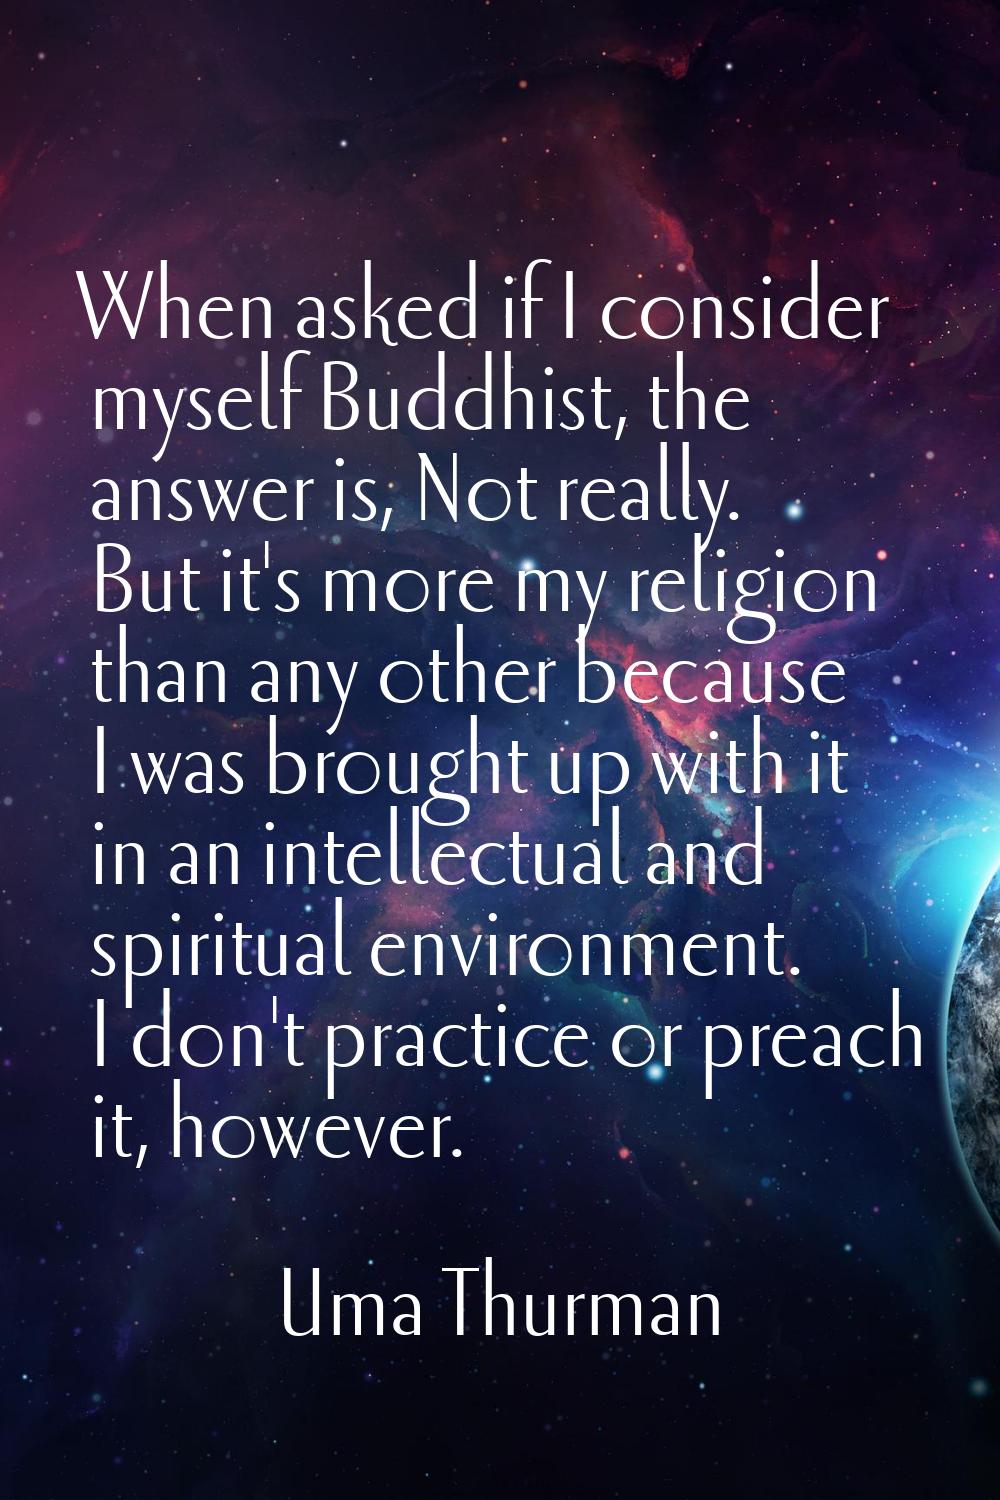 When asked if I consider myself Buddhist, the answer is, Not really. But it's more my religion than